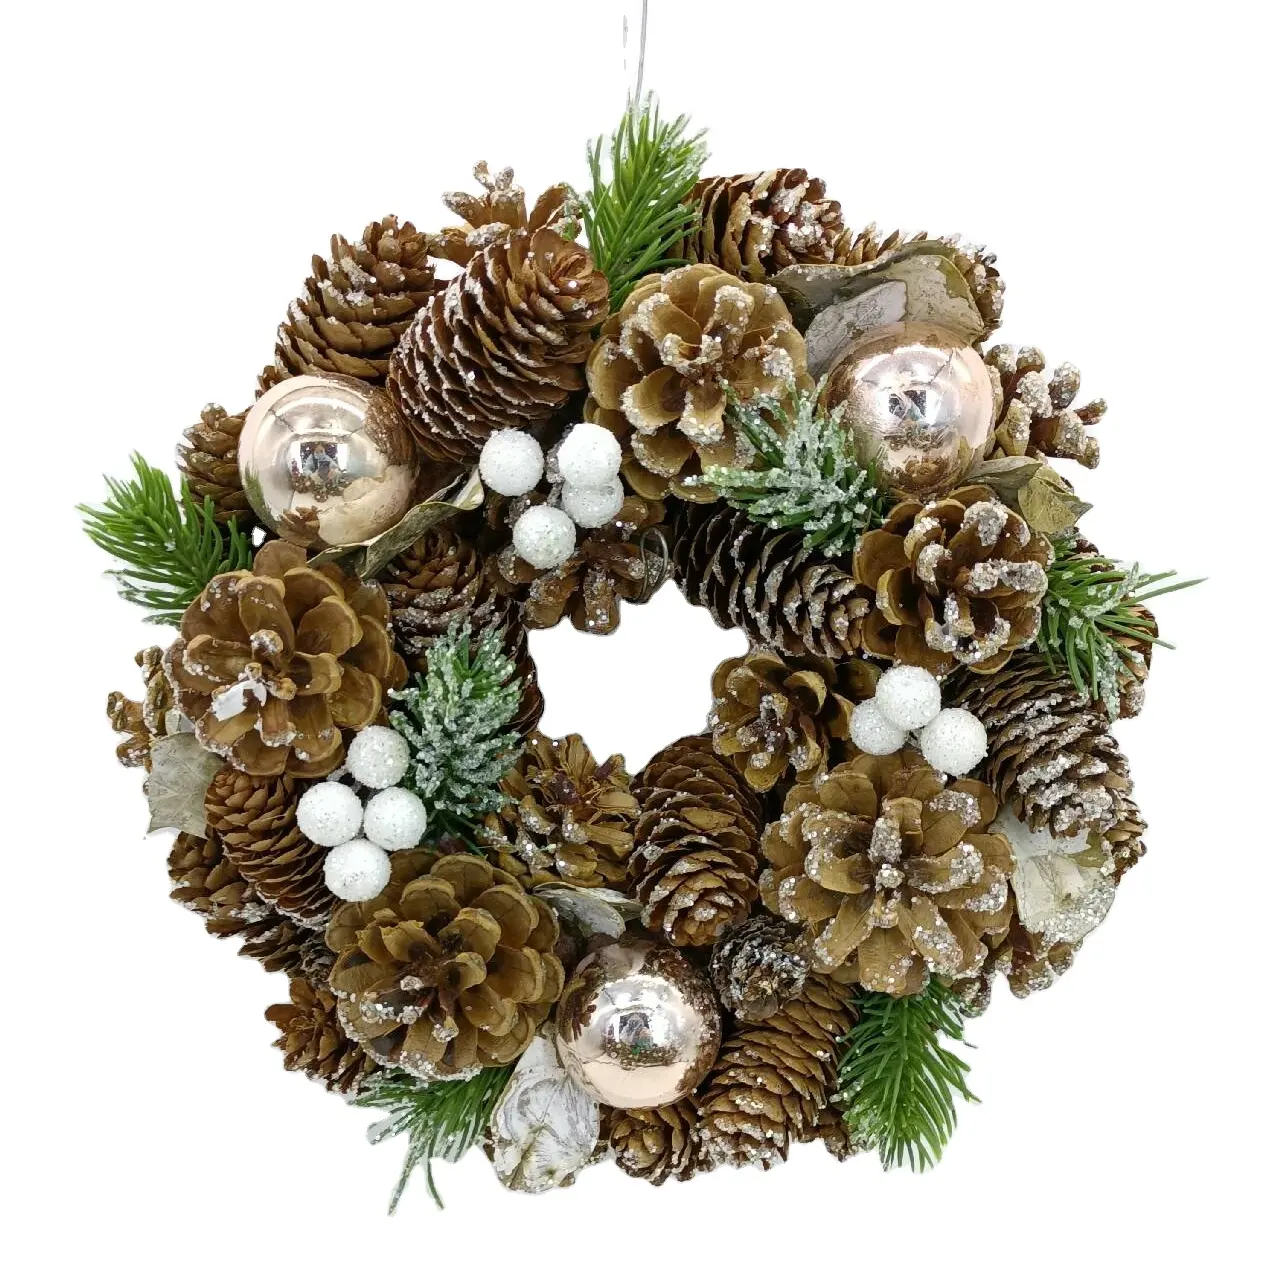 Amazon Top Seller Custom Decorations Home Artificial Plant Pine White Berry Gold Plastic Ball Mini Wreath Christmas Supplies